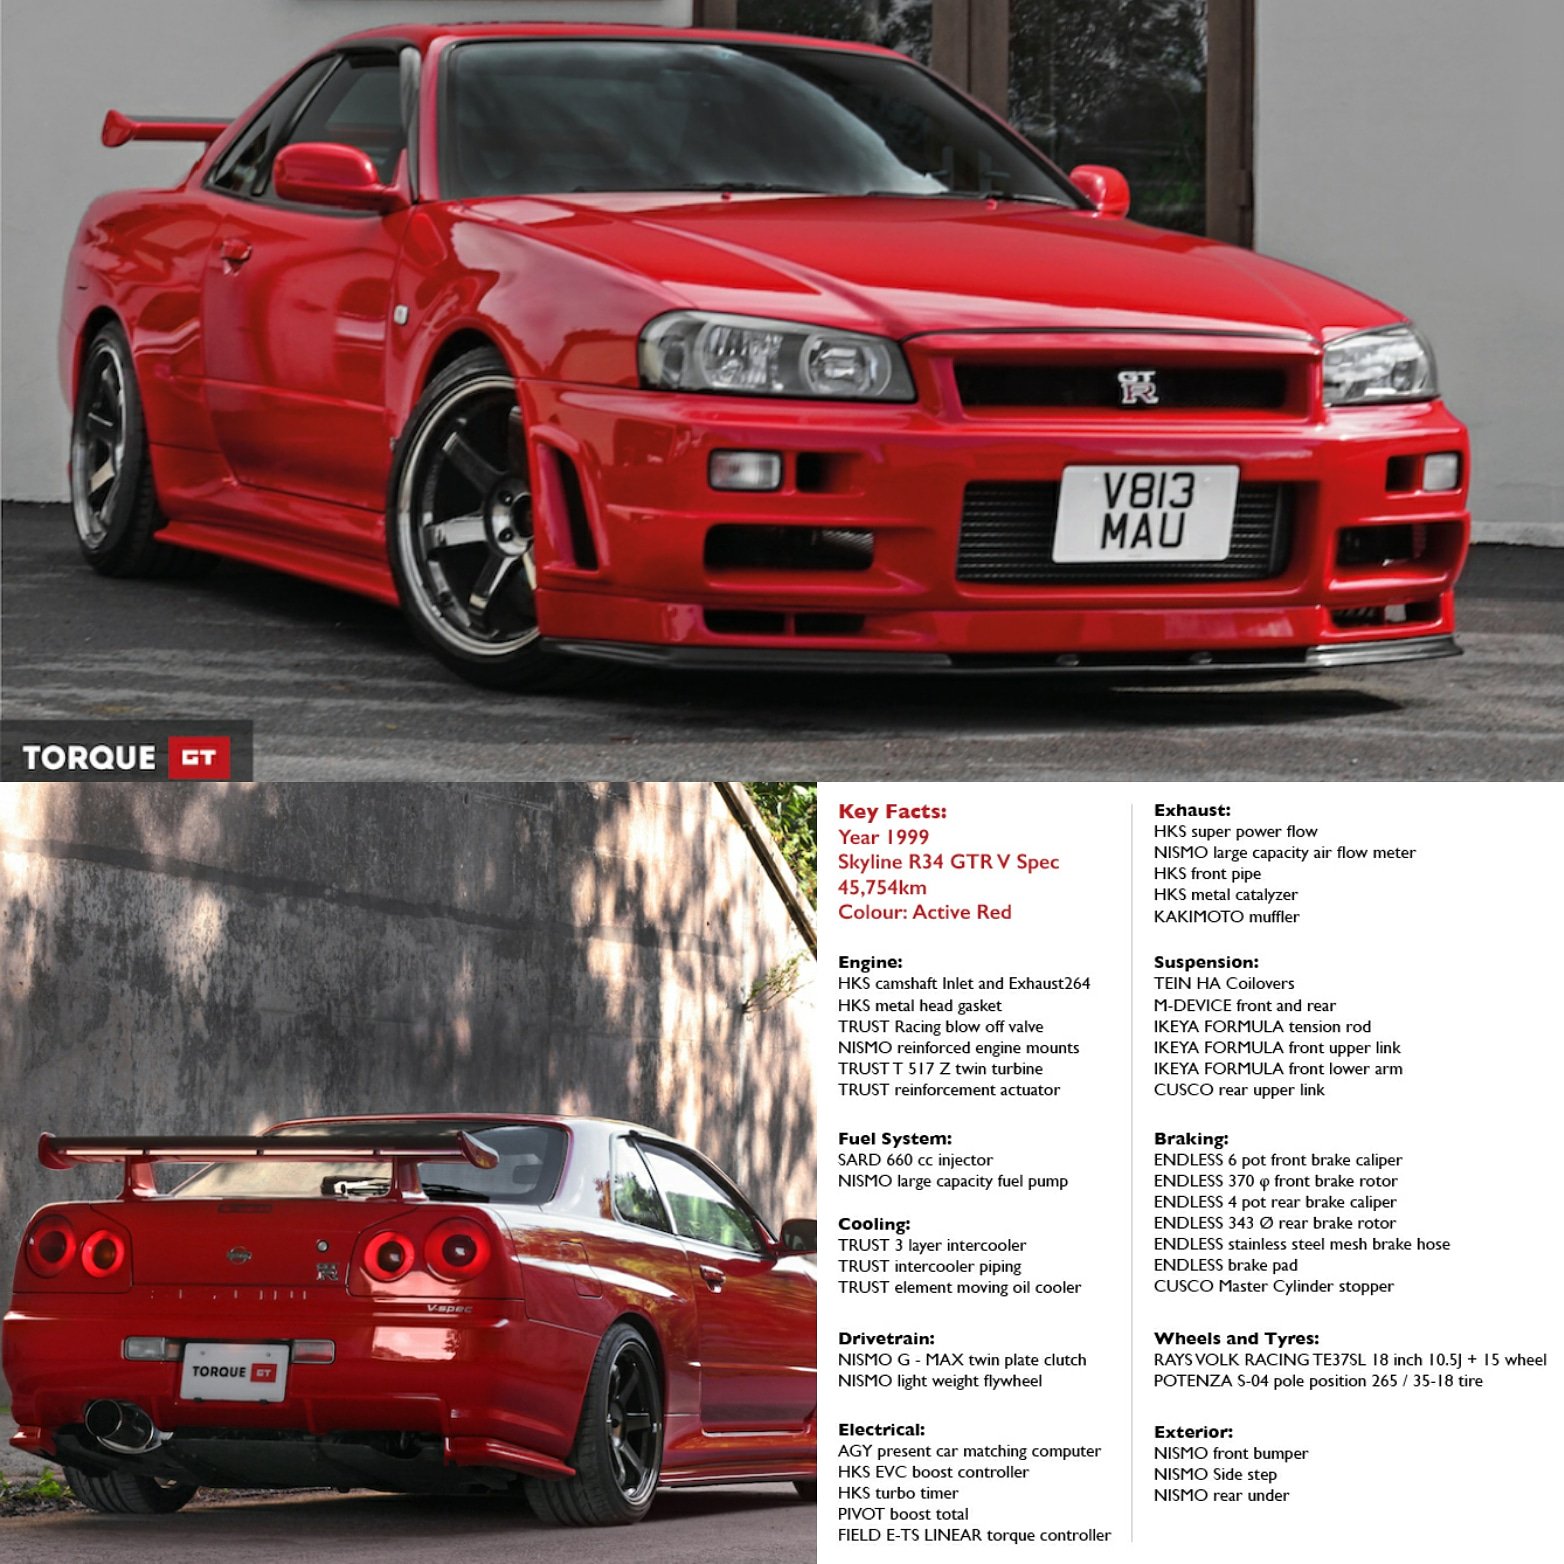 Undercover Imports Wow Nissan Skyline R34 Gt R V Spec In Active Red Ar2 Torquegt Here T Co Immaky9bzy Nissan R34 Gtr Vspec Activered Jdm Japanesecars Godzilla Skyline Nismo Hks